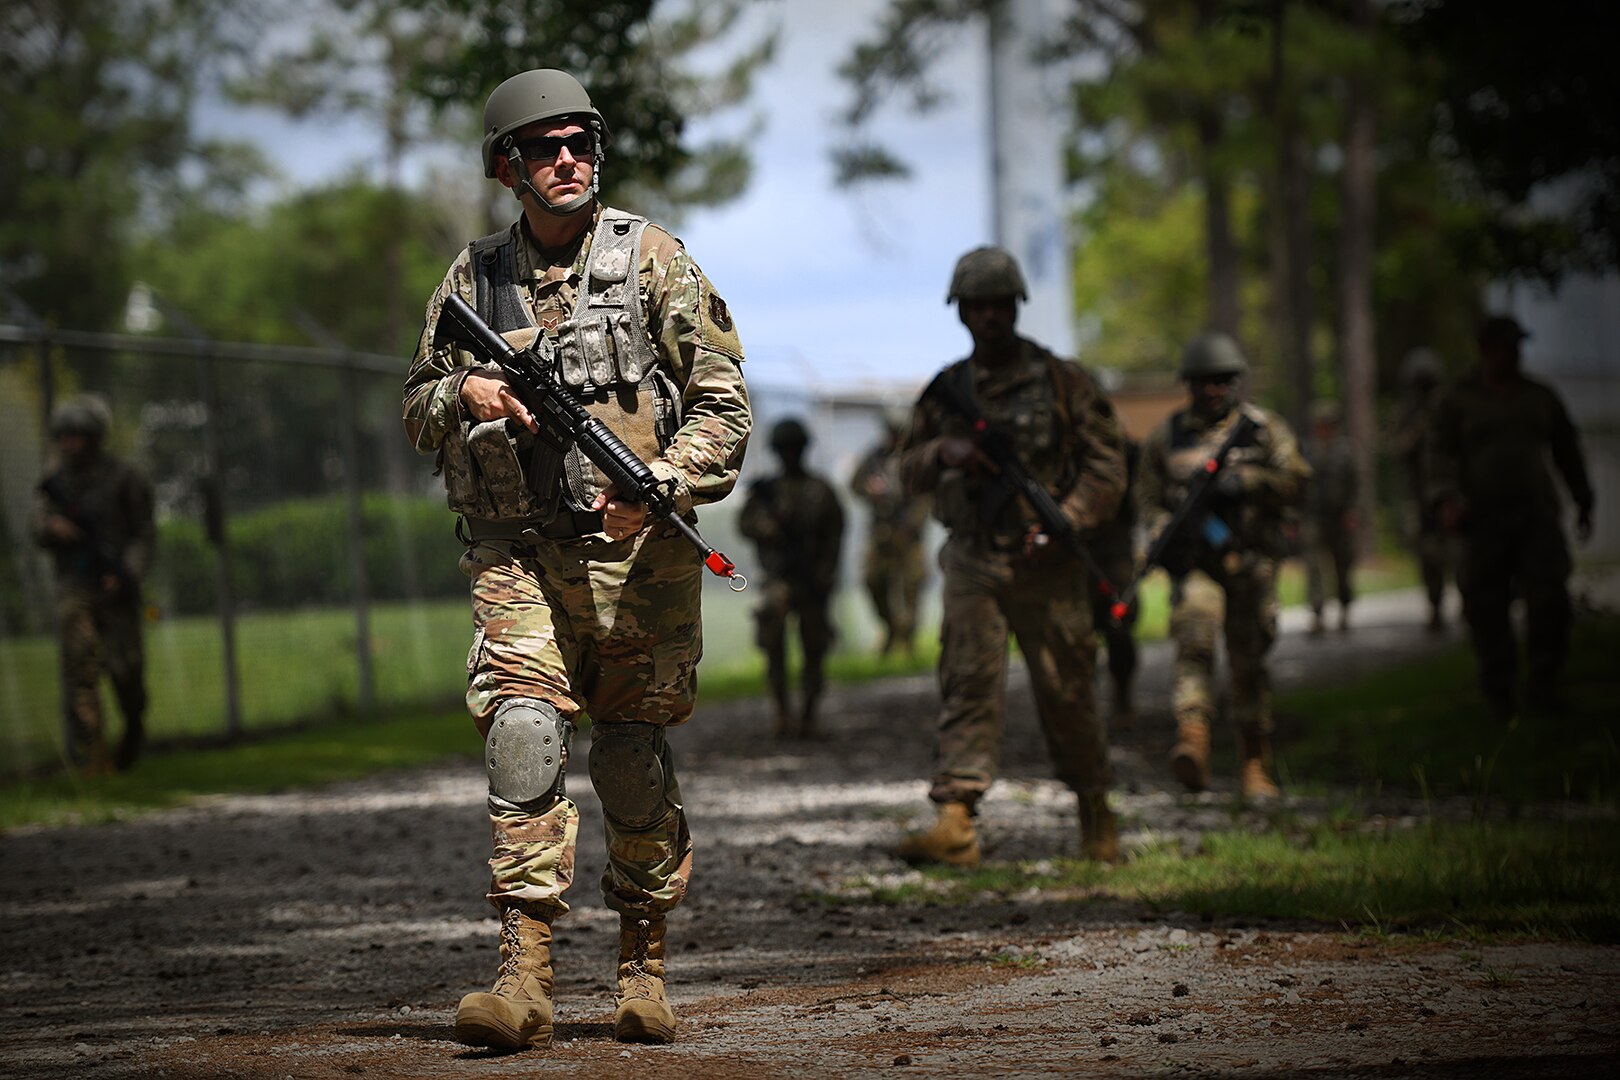 Staff Sgt. Jacob Tapley, 159th Civil Engineer Squadron, takes part in dismounted patrol tactics as part of basic combat skills training at the Air Dominance Center in Savannah, Ga., June 7, 2021. The training was led by the 159th Security Forces Squadron as part of unit operations readiness.